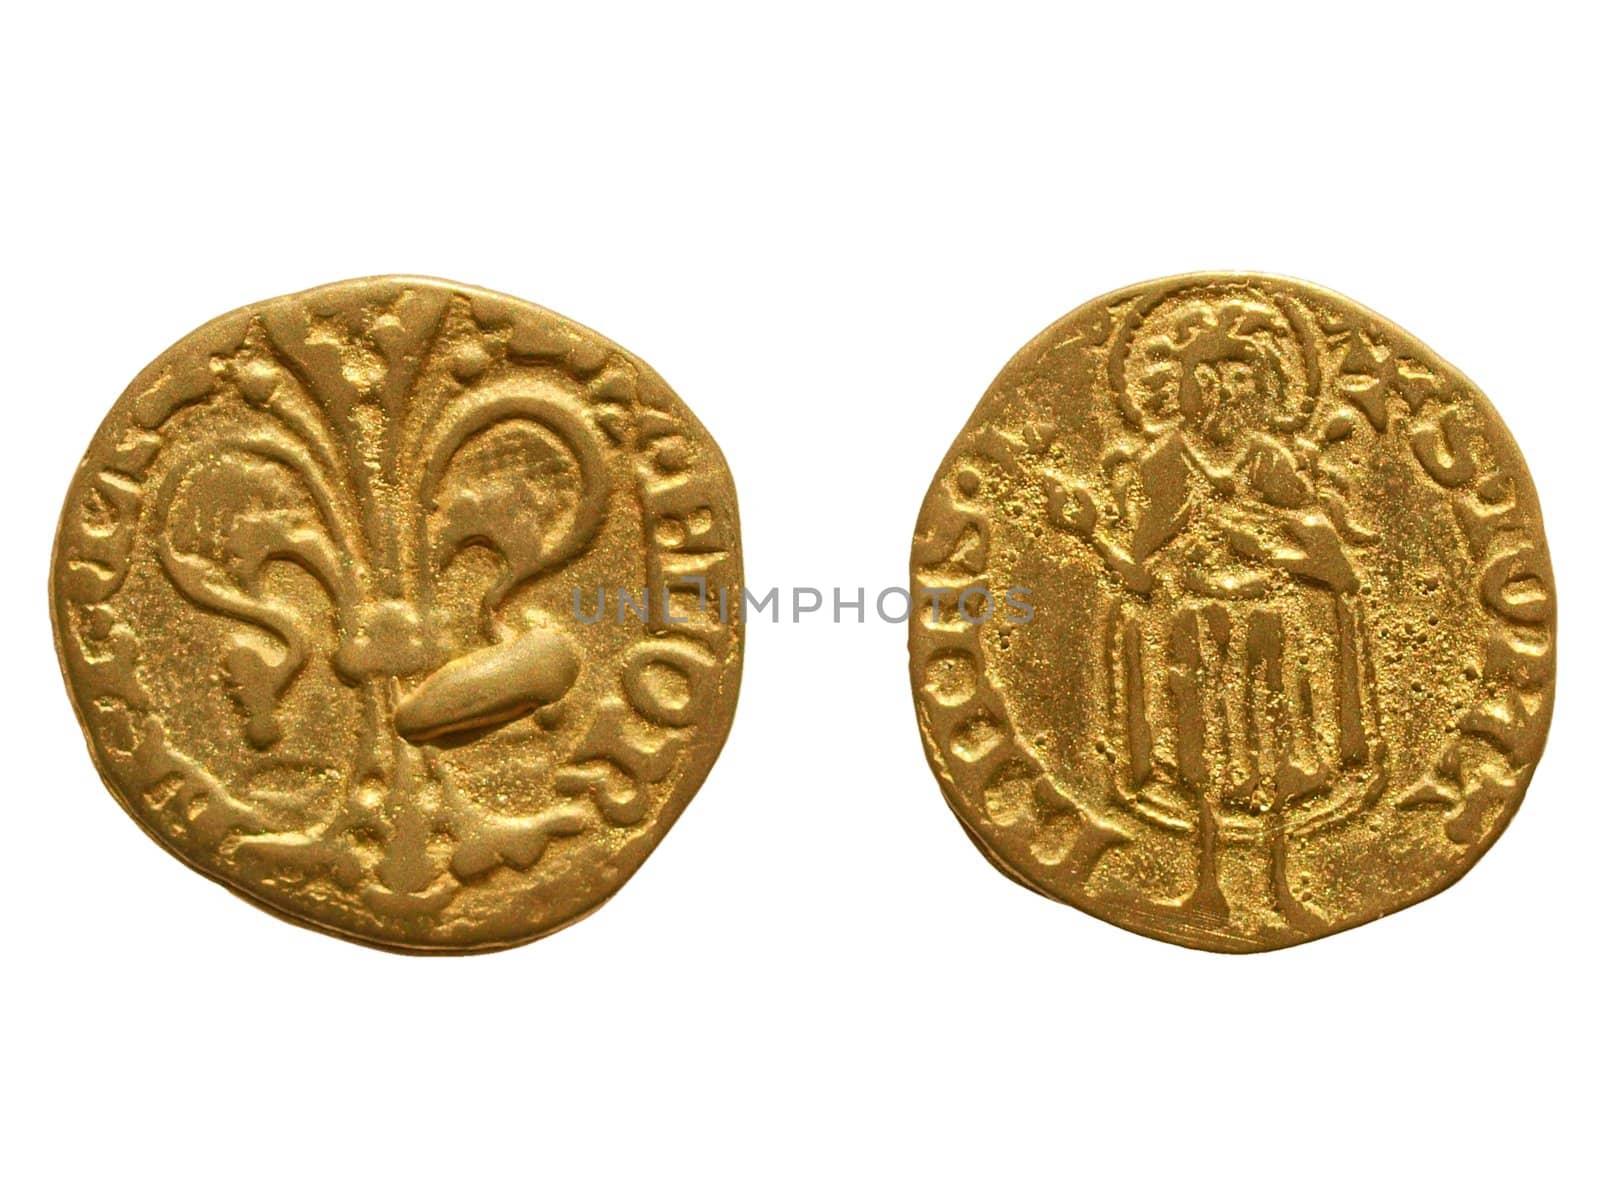 Gold Florin (Fiorino d'oro) coin issued circa 1256 in Florence, Italy - reading "Florentia" on the front side and "S. Iohannes" on the rear side